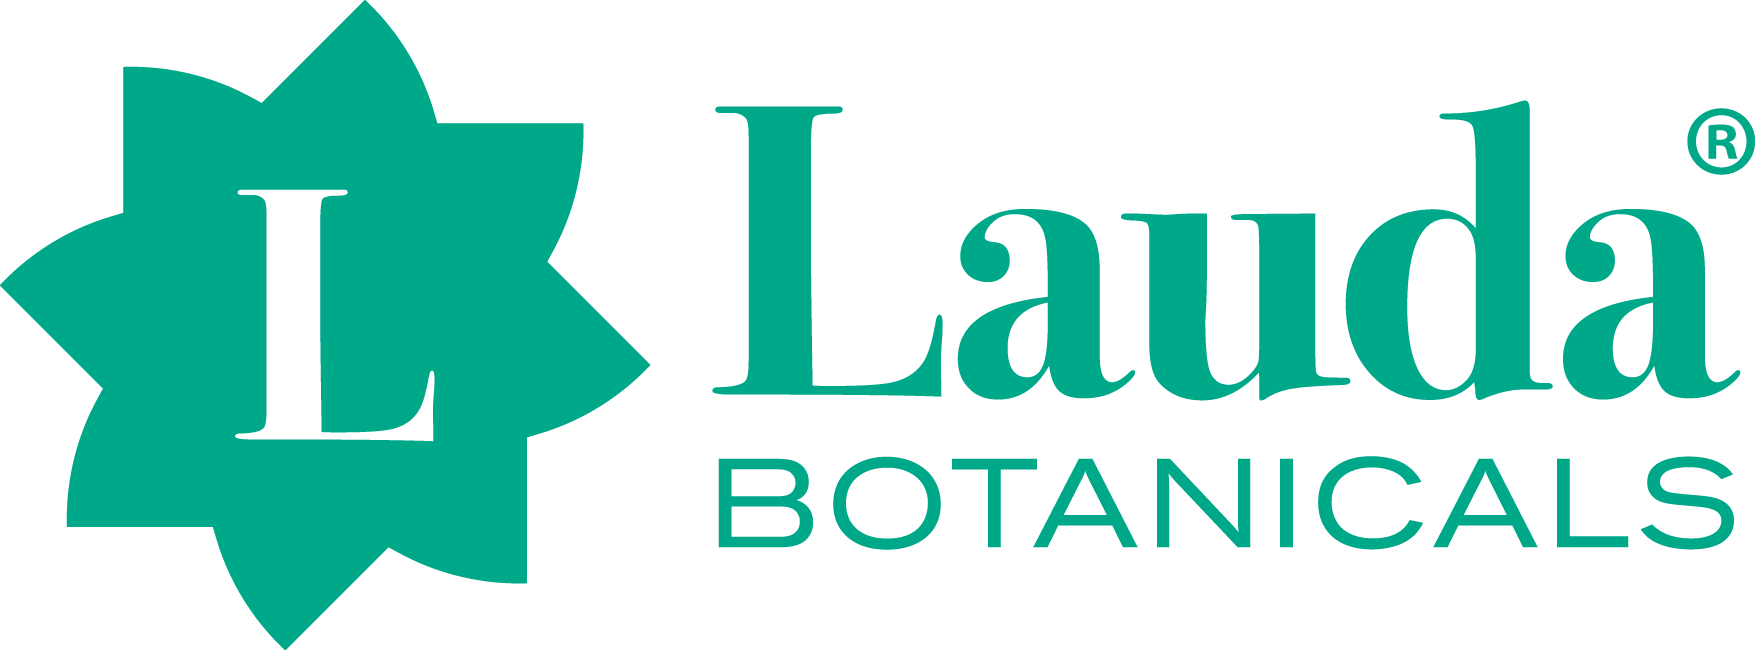 Lauda Botanicals Skincare - Natural botanical-based skin care products. Safe and Effective. Products for Acne and Oily Skin Control